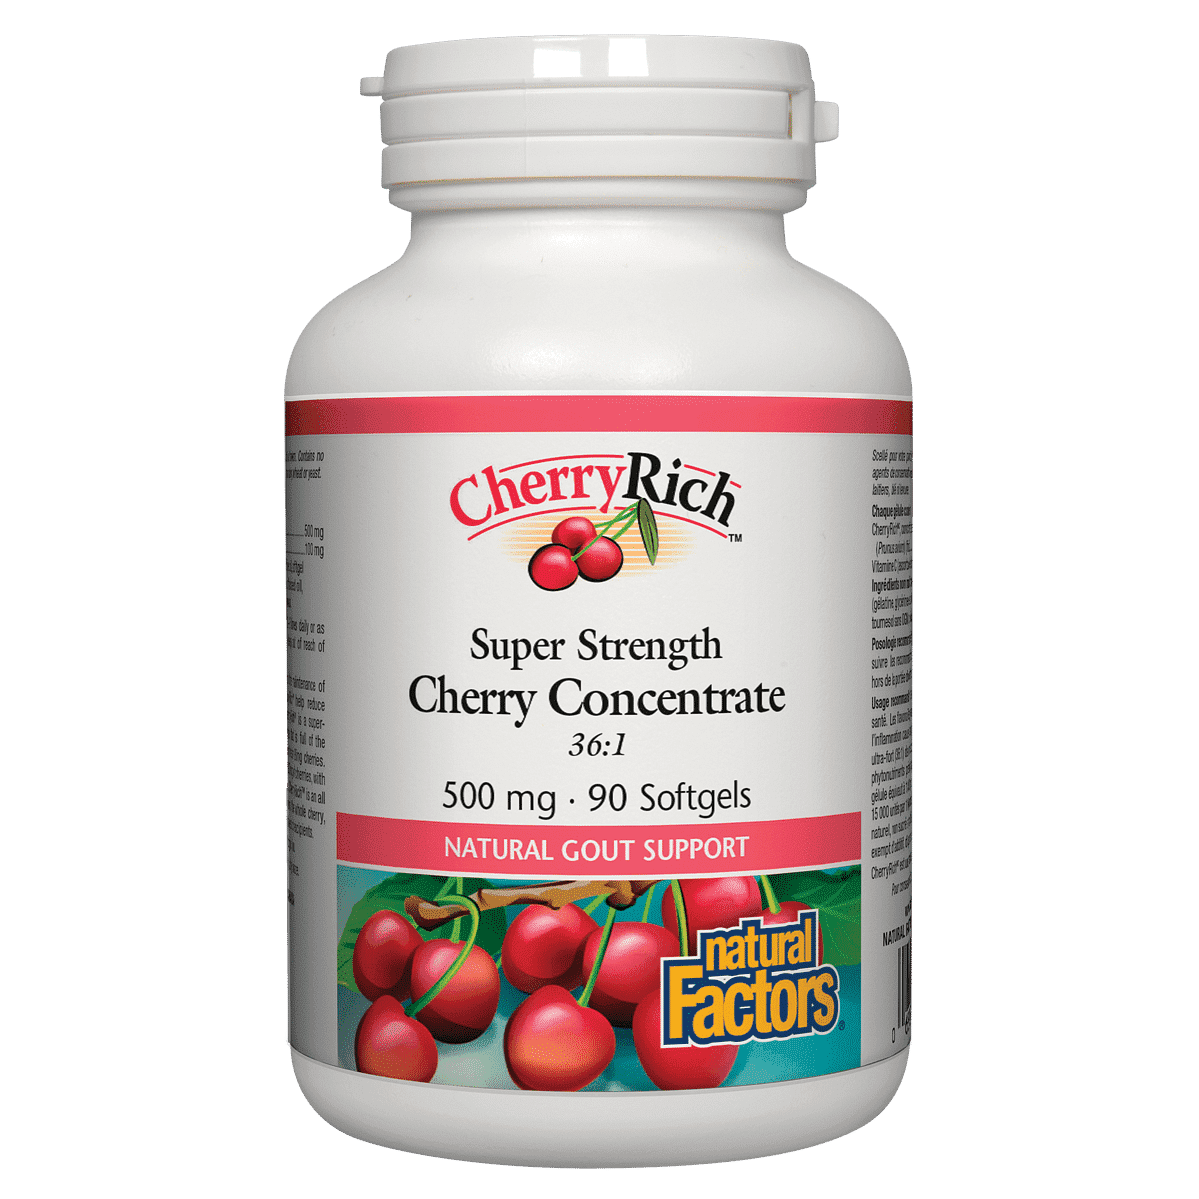 Natural Factors Super Strength Cherry Concentrate At Vitasave.ca